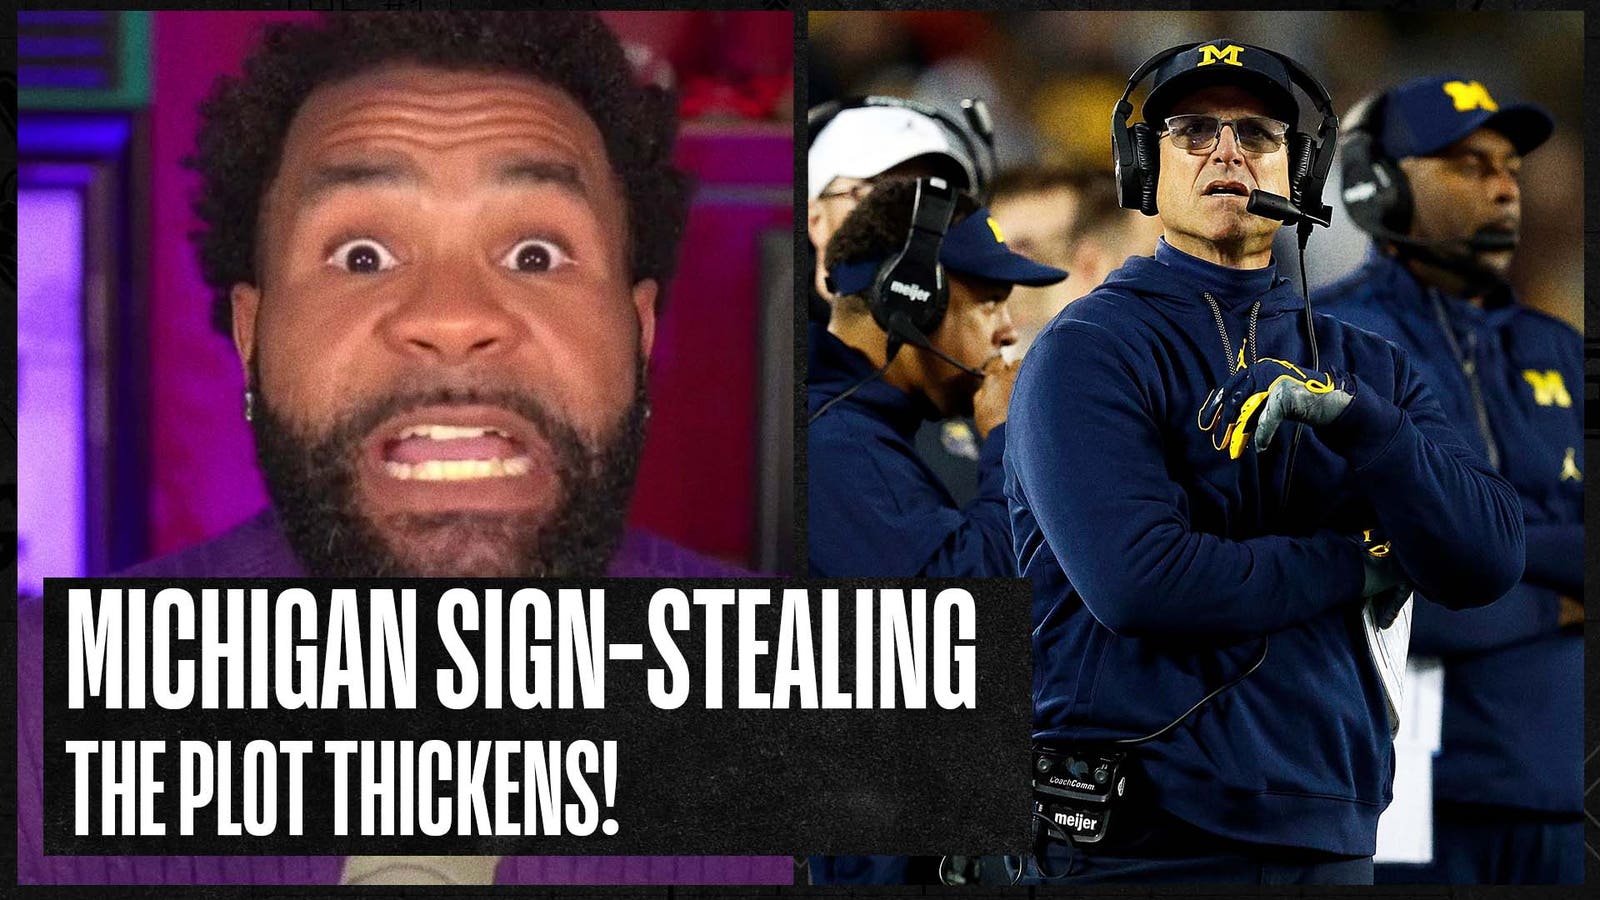 What to expect in the Michigan sign-stealing investigation